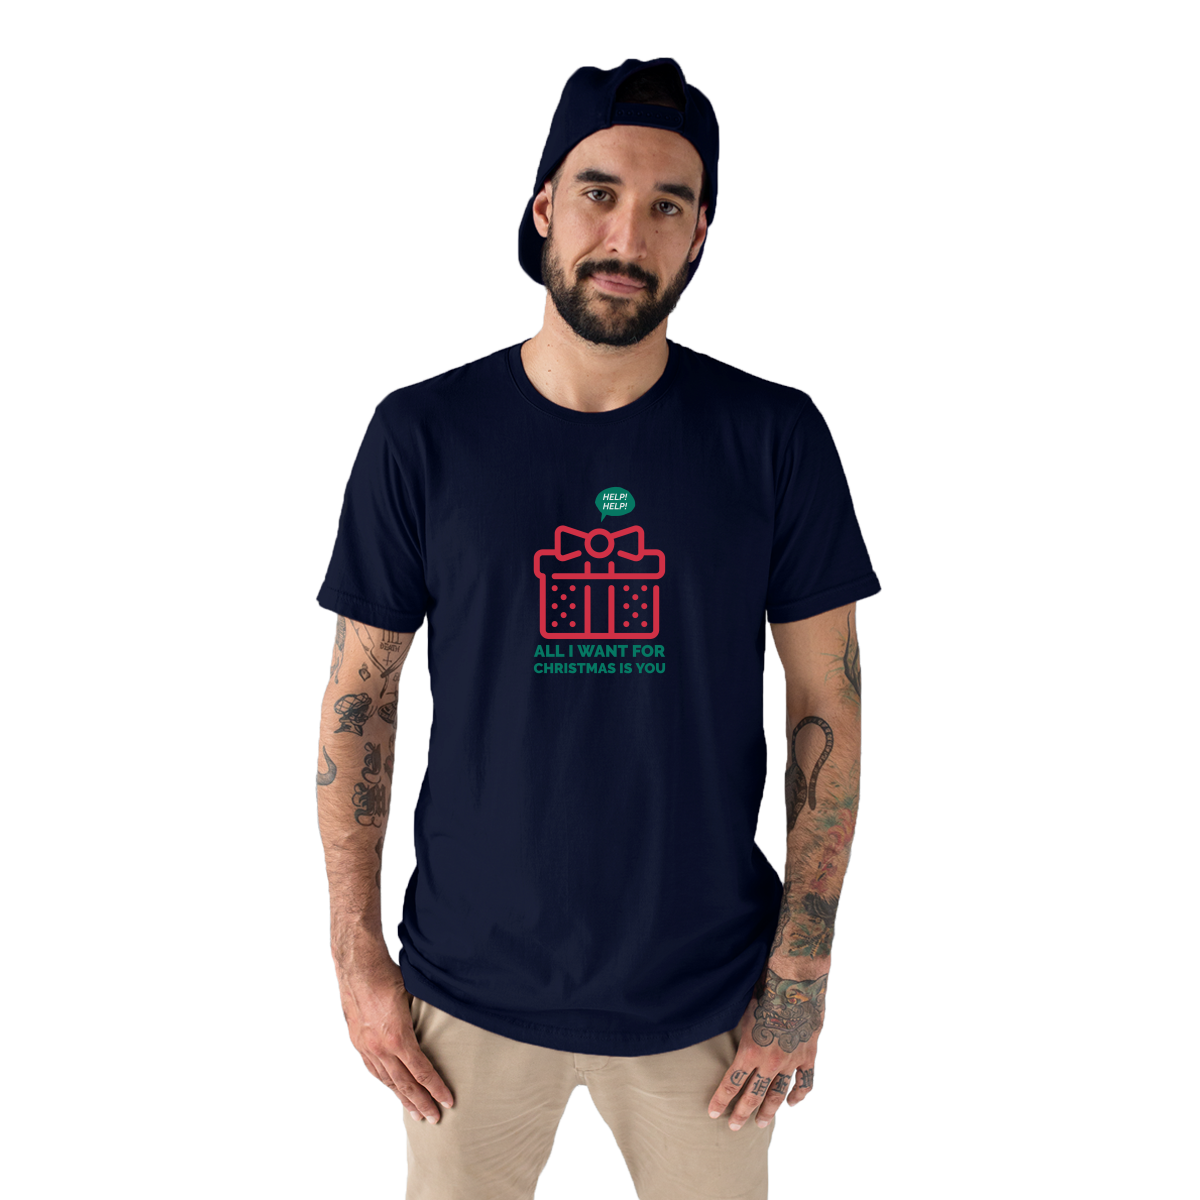 All I Want For Christmas Is You Men's T-shirt | Navy